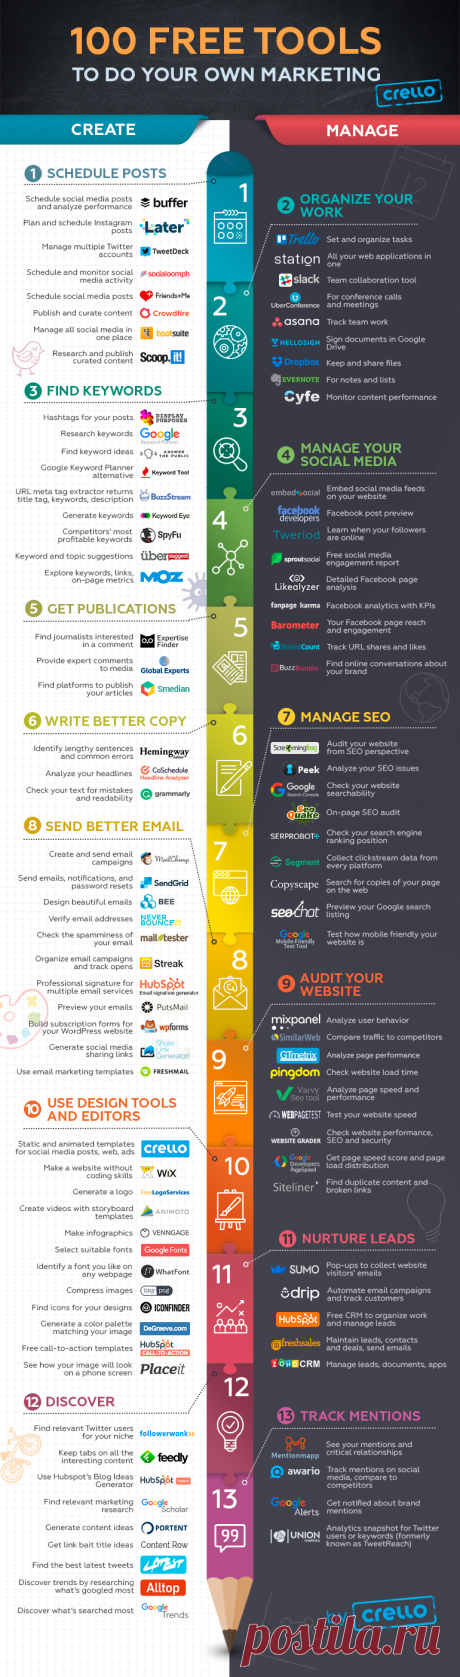 100 Free Marketing Tools to Help You Grow Your Business - Infographic
They break them down into the following categories:

Scheduling posts
Organising your work
Finding keywords
Social media management
Get publications
Manage SEO
Send better email
Audit your website
Design tools and editors
Nurture leads
Discover
Track mentions